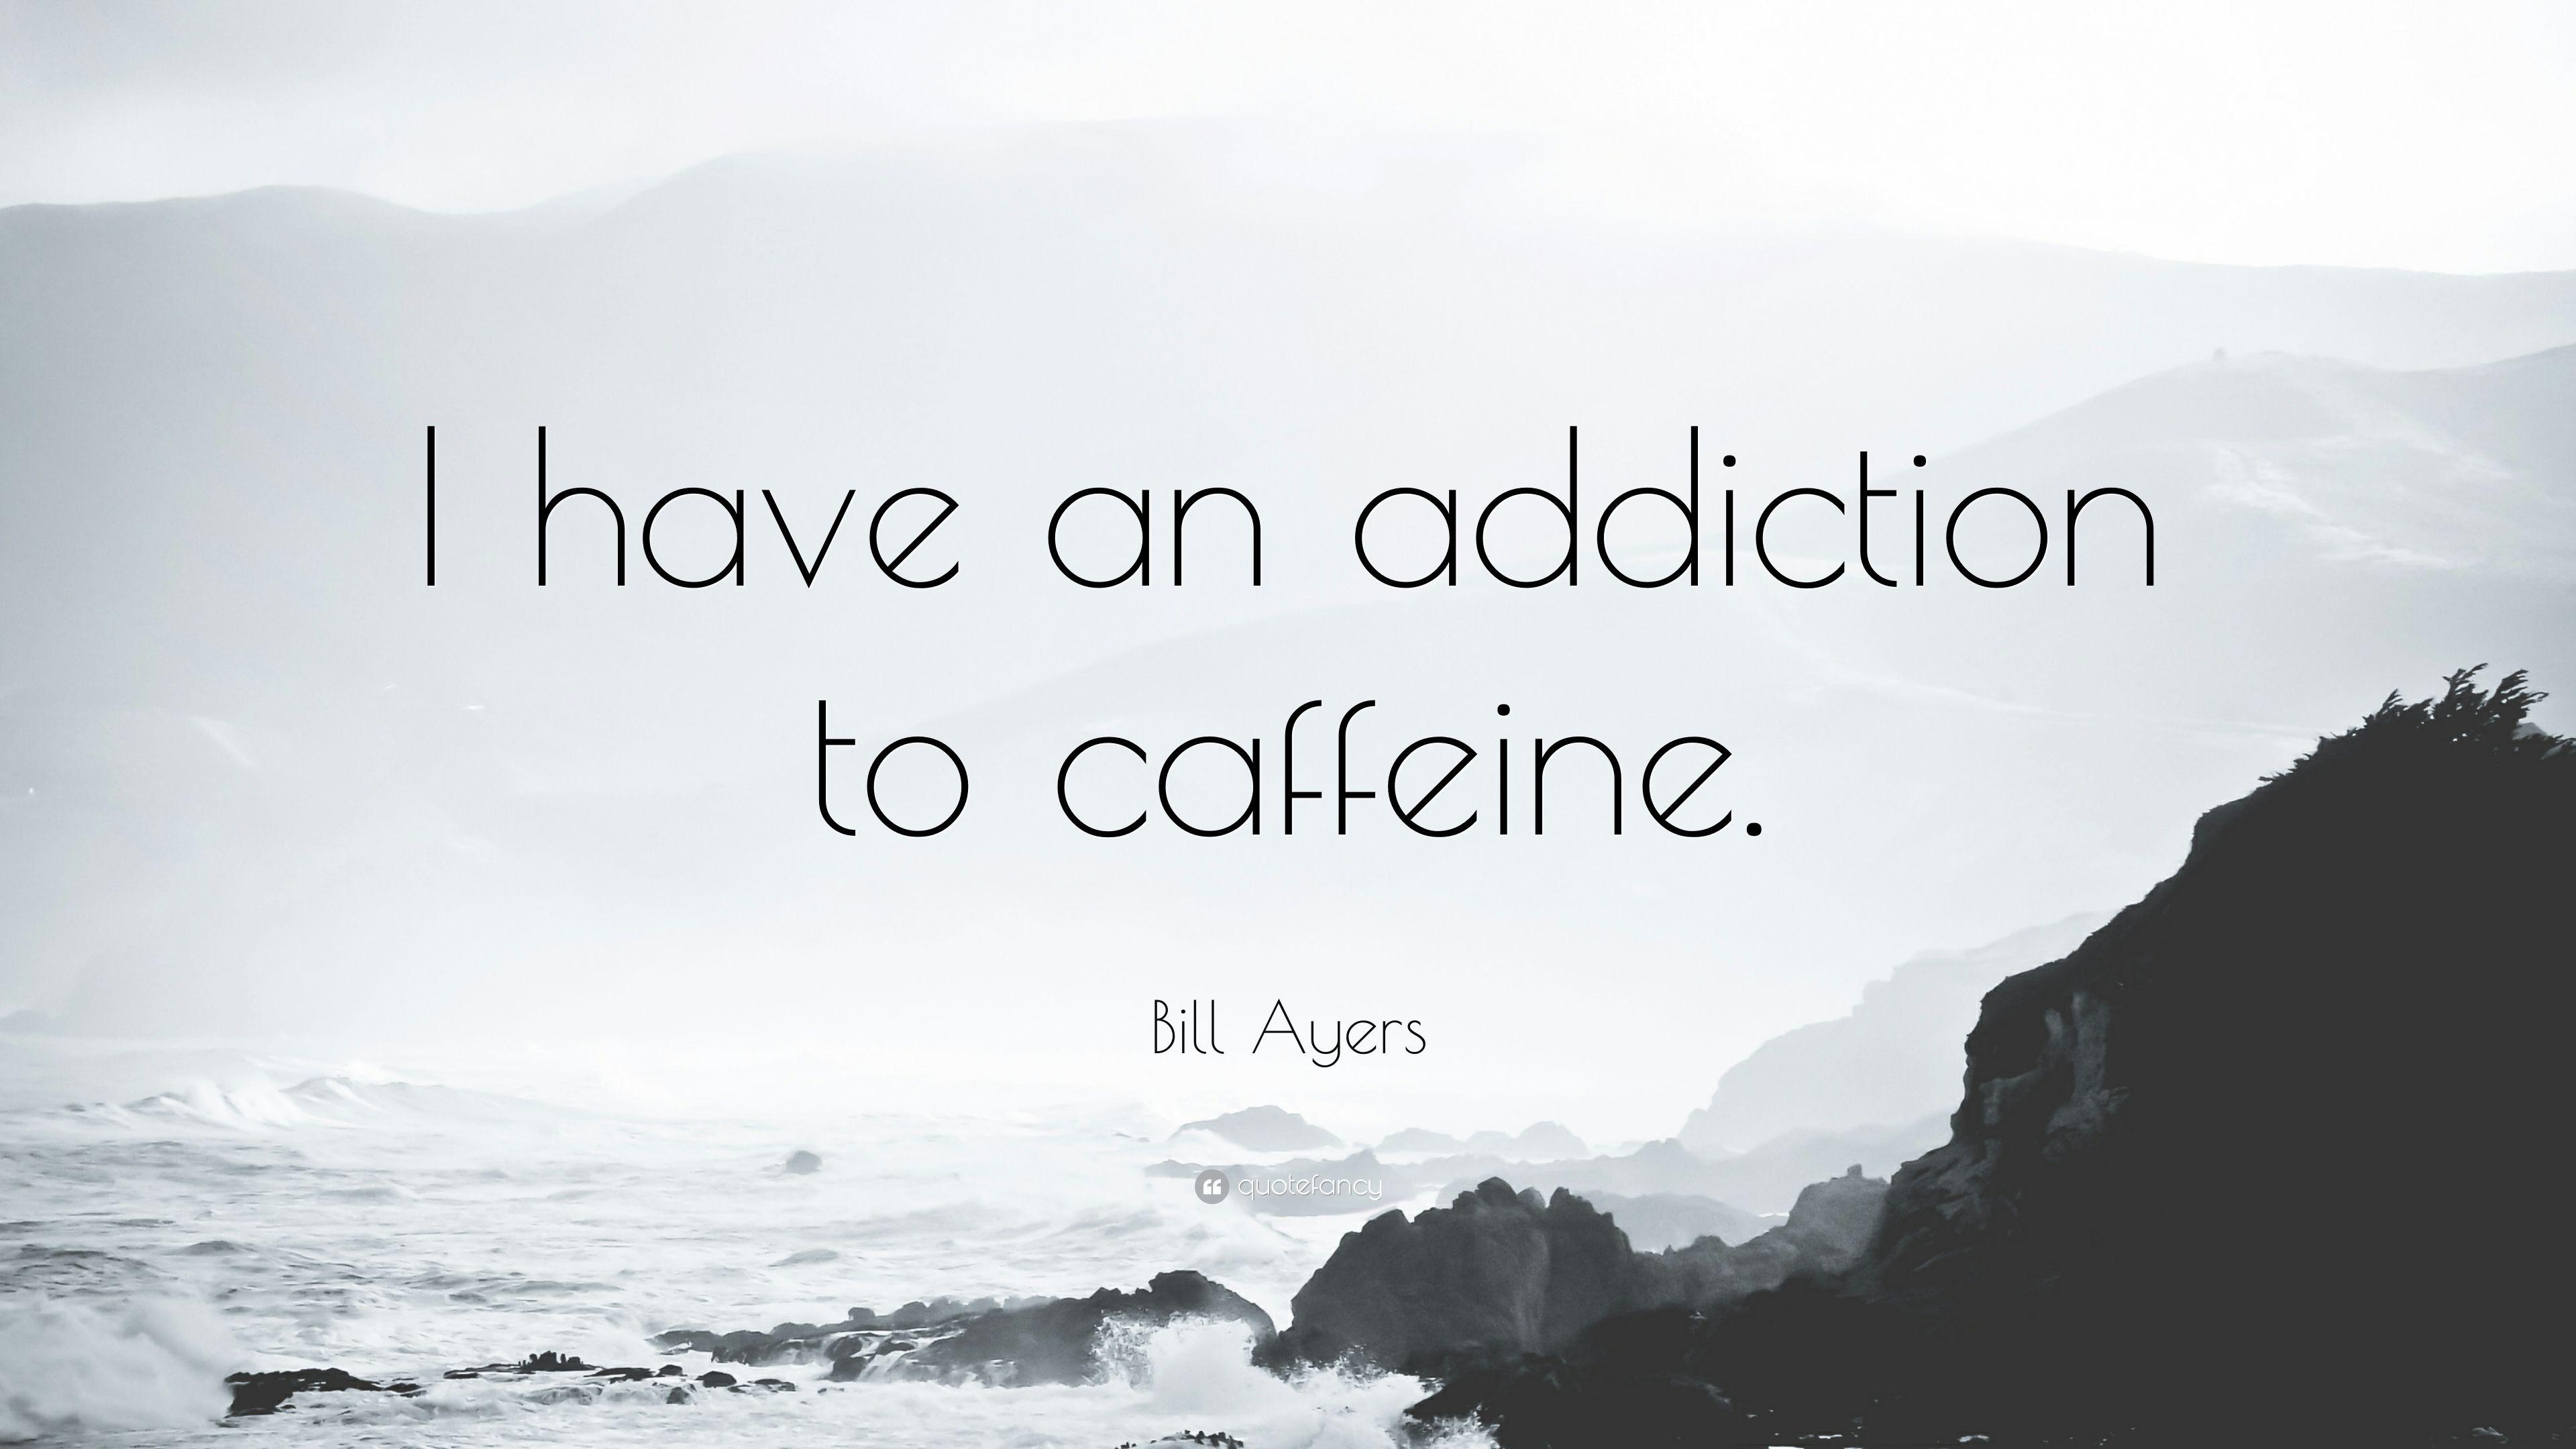 Bill Ayers Quote: “I have an addiction to caffeine.” 7 wallpaper